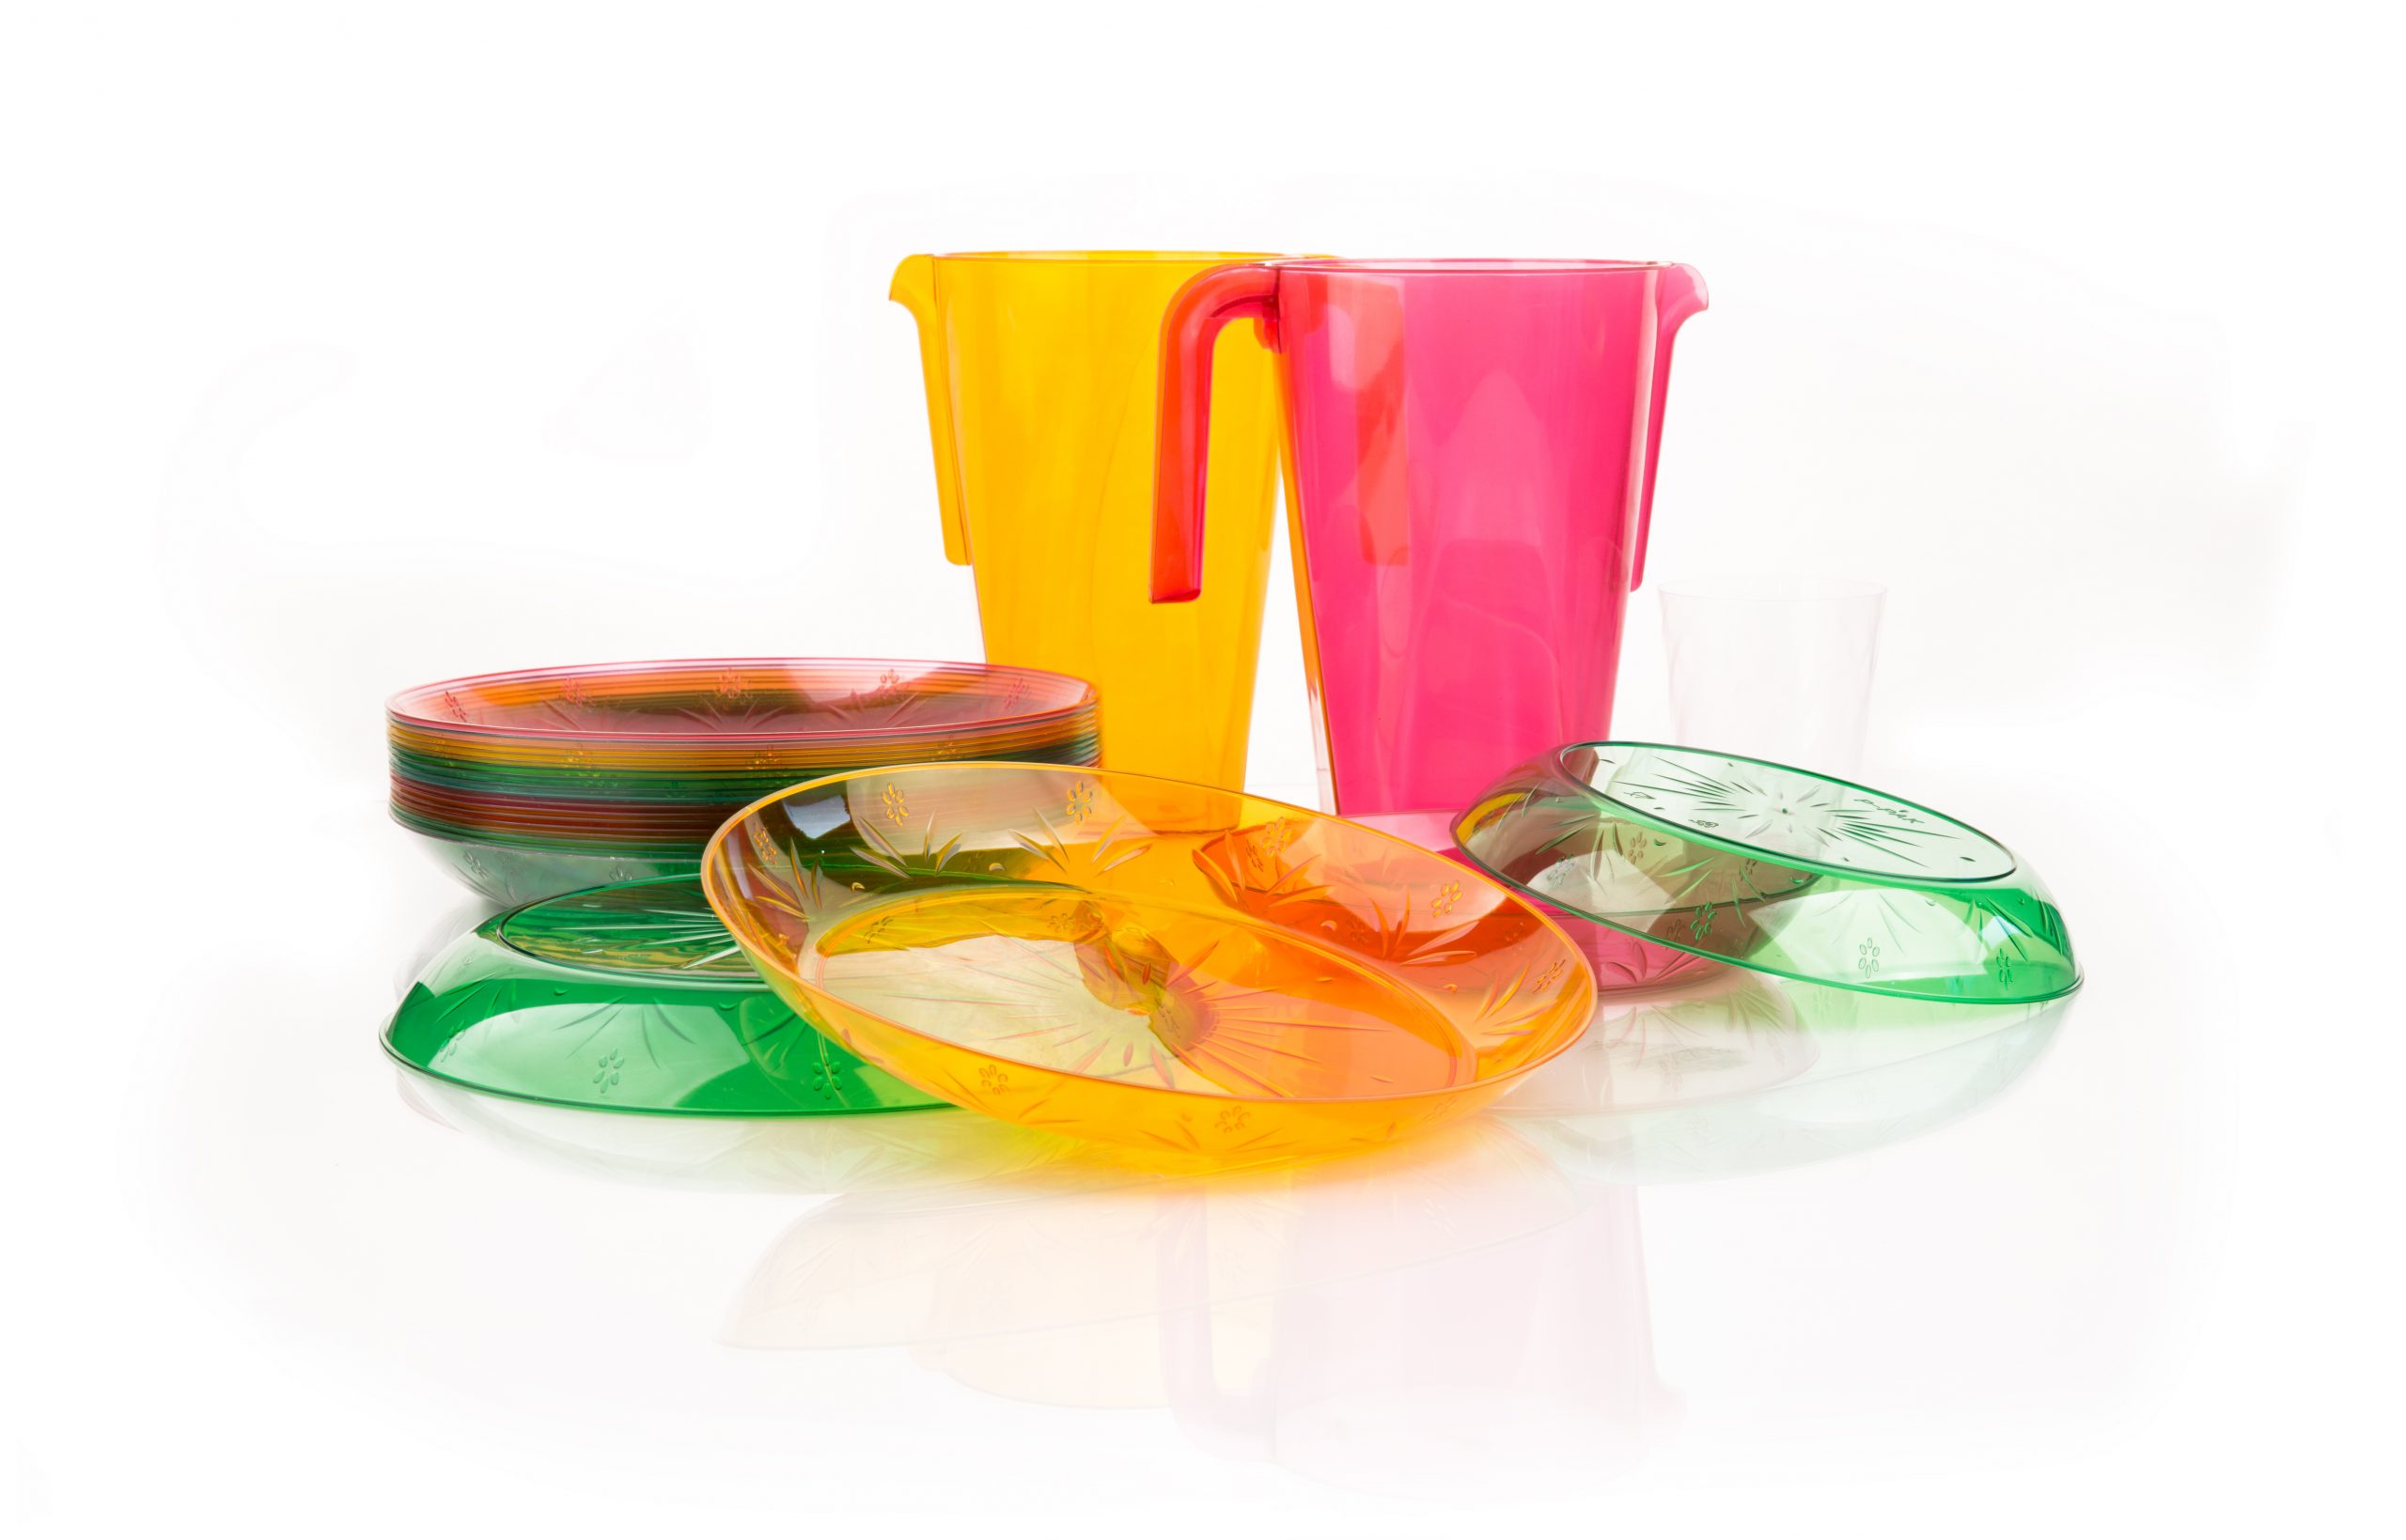 Thermoformed Food Containers